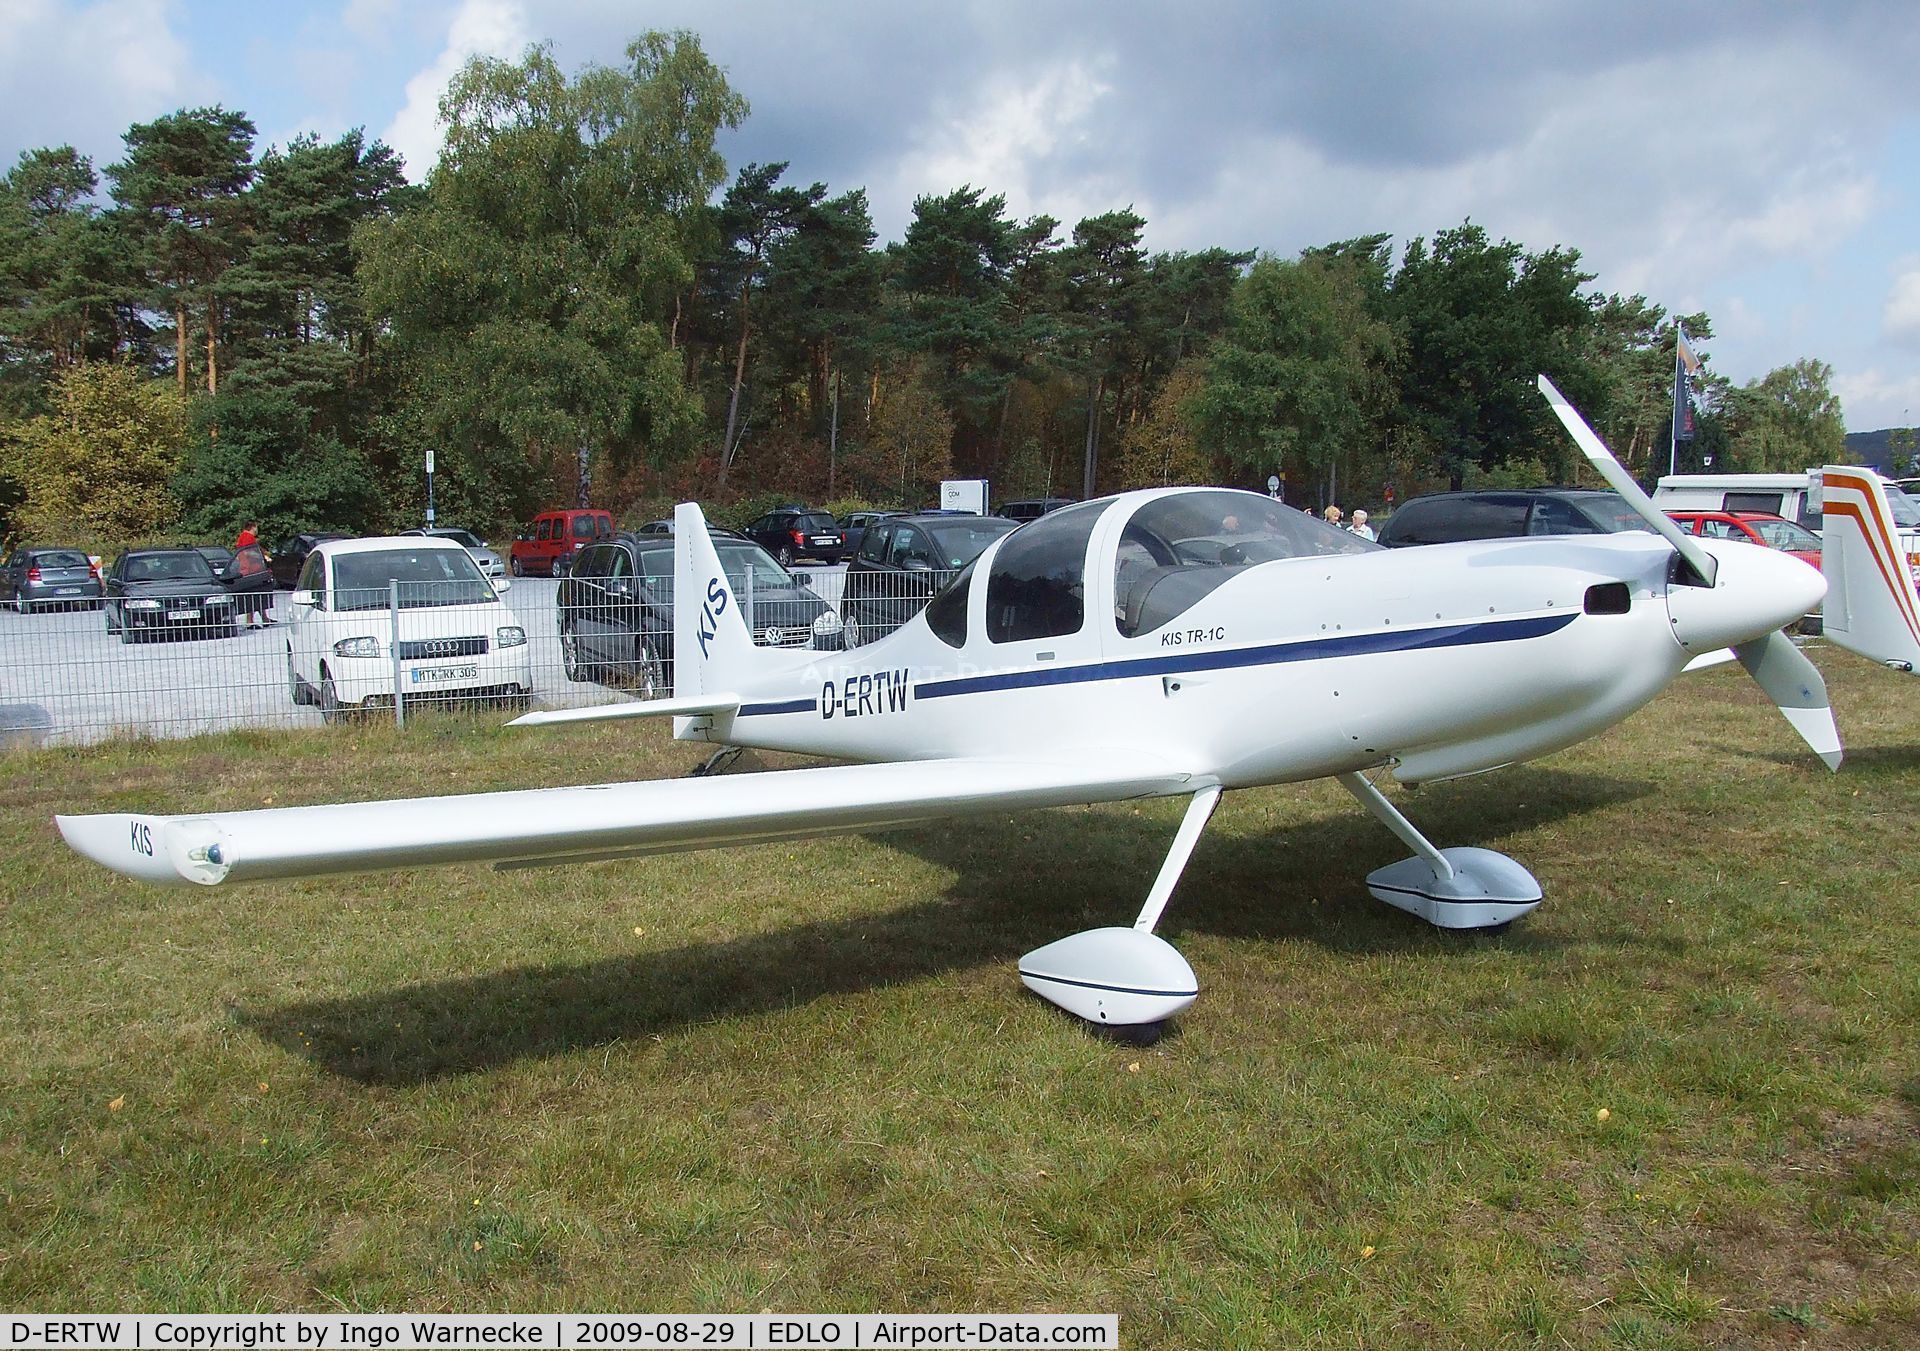 D-ERTW, Tri-R Kis TR-1 C/N 104, KIS (Twellmann) TR-1C at the 2009 OUV-Meeting at Oerlinghausen airfield